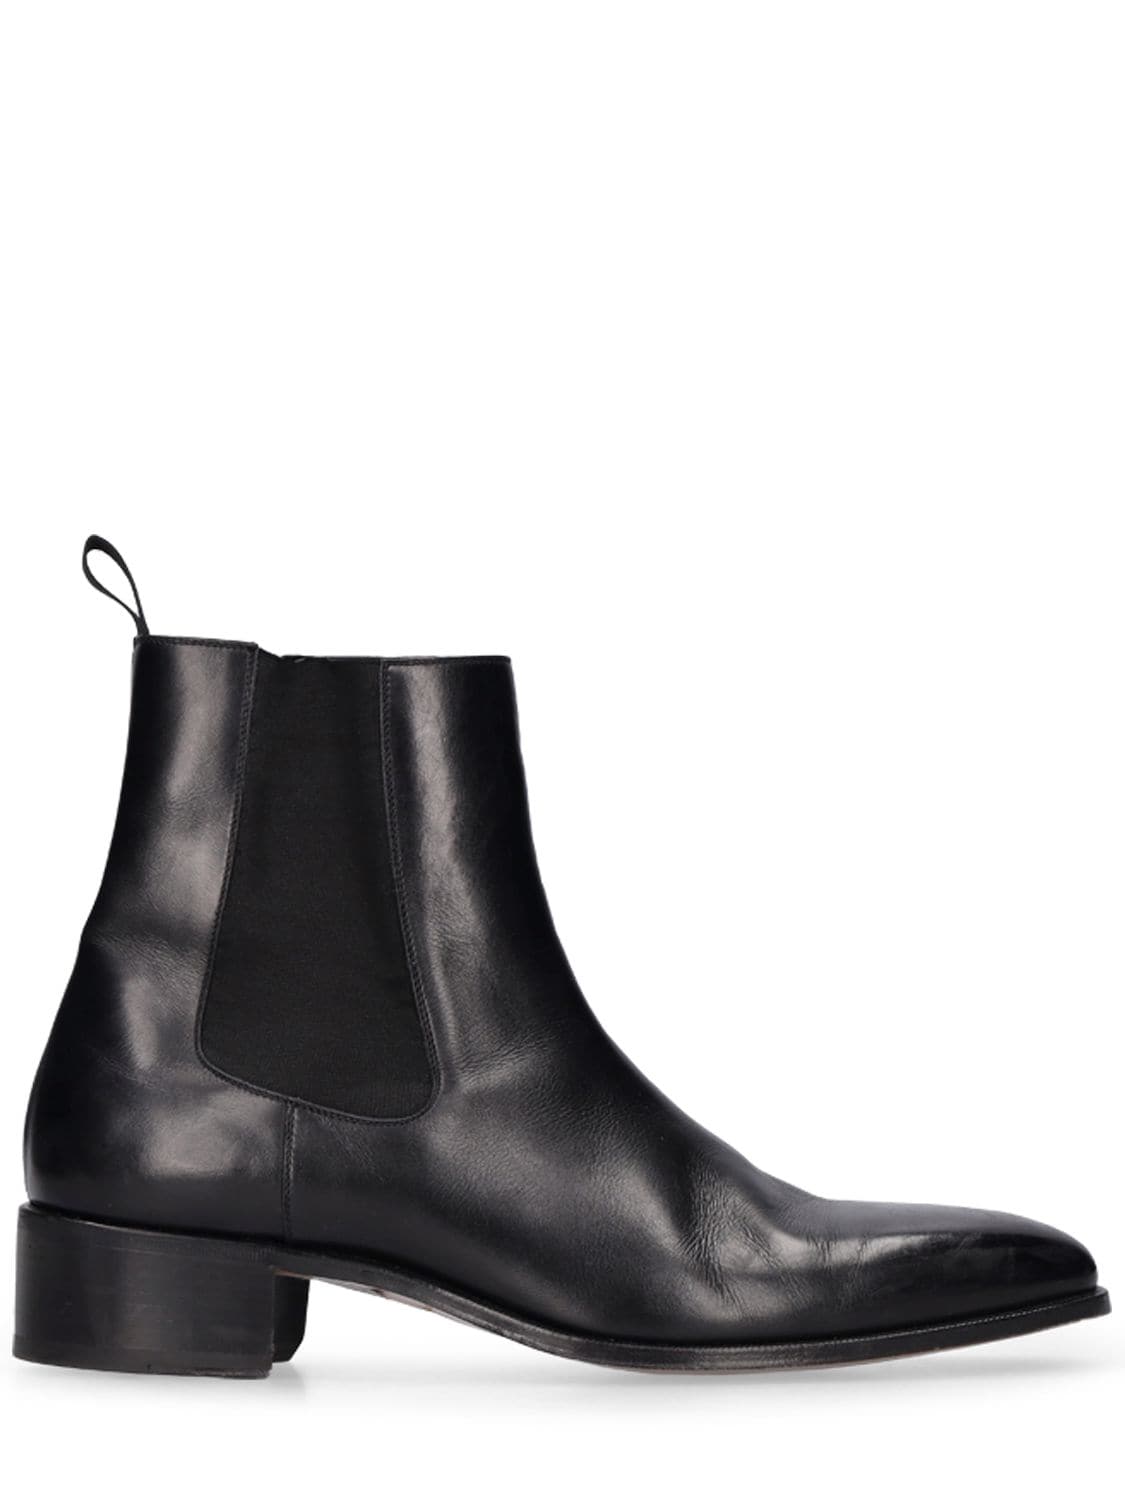 Mm Burnished Leather Ankle Boots - TOM FORD - Modalova